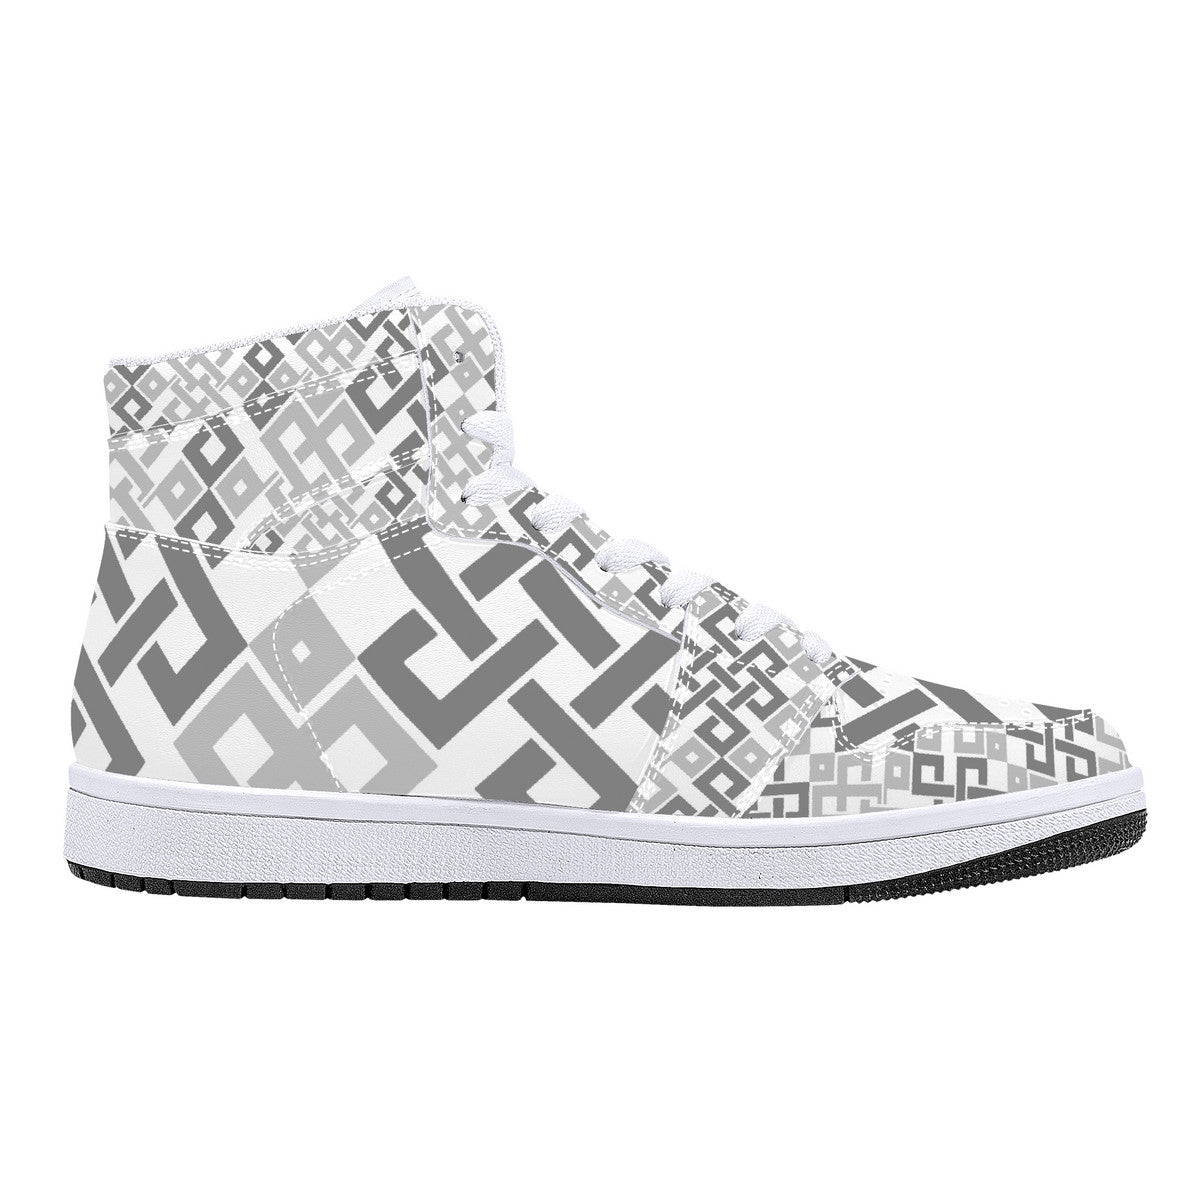 "Nix Karma" High-Top Synthetic Leather Sneakers